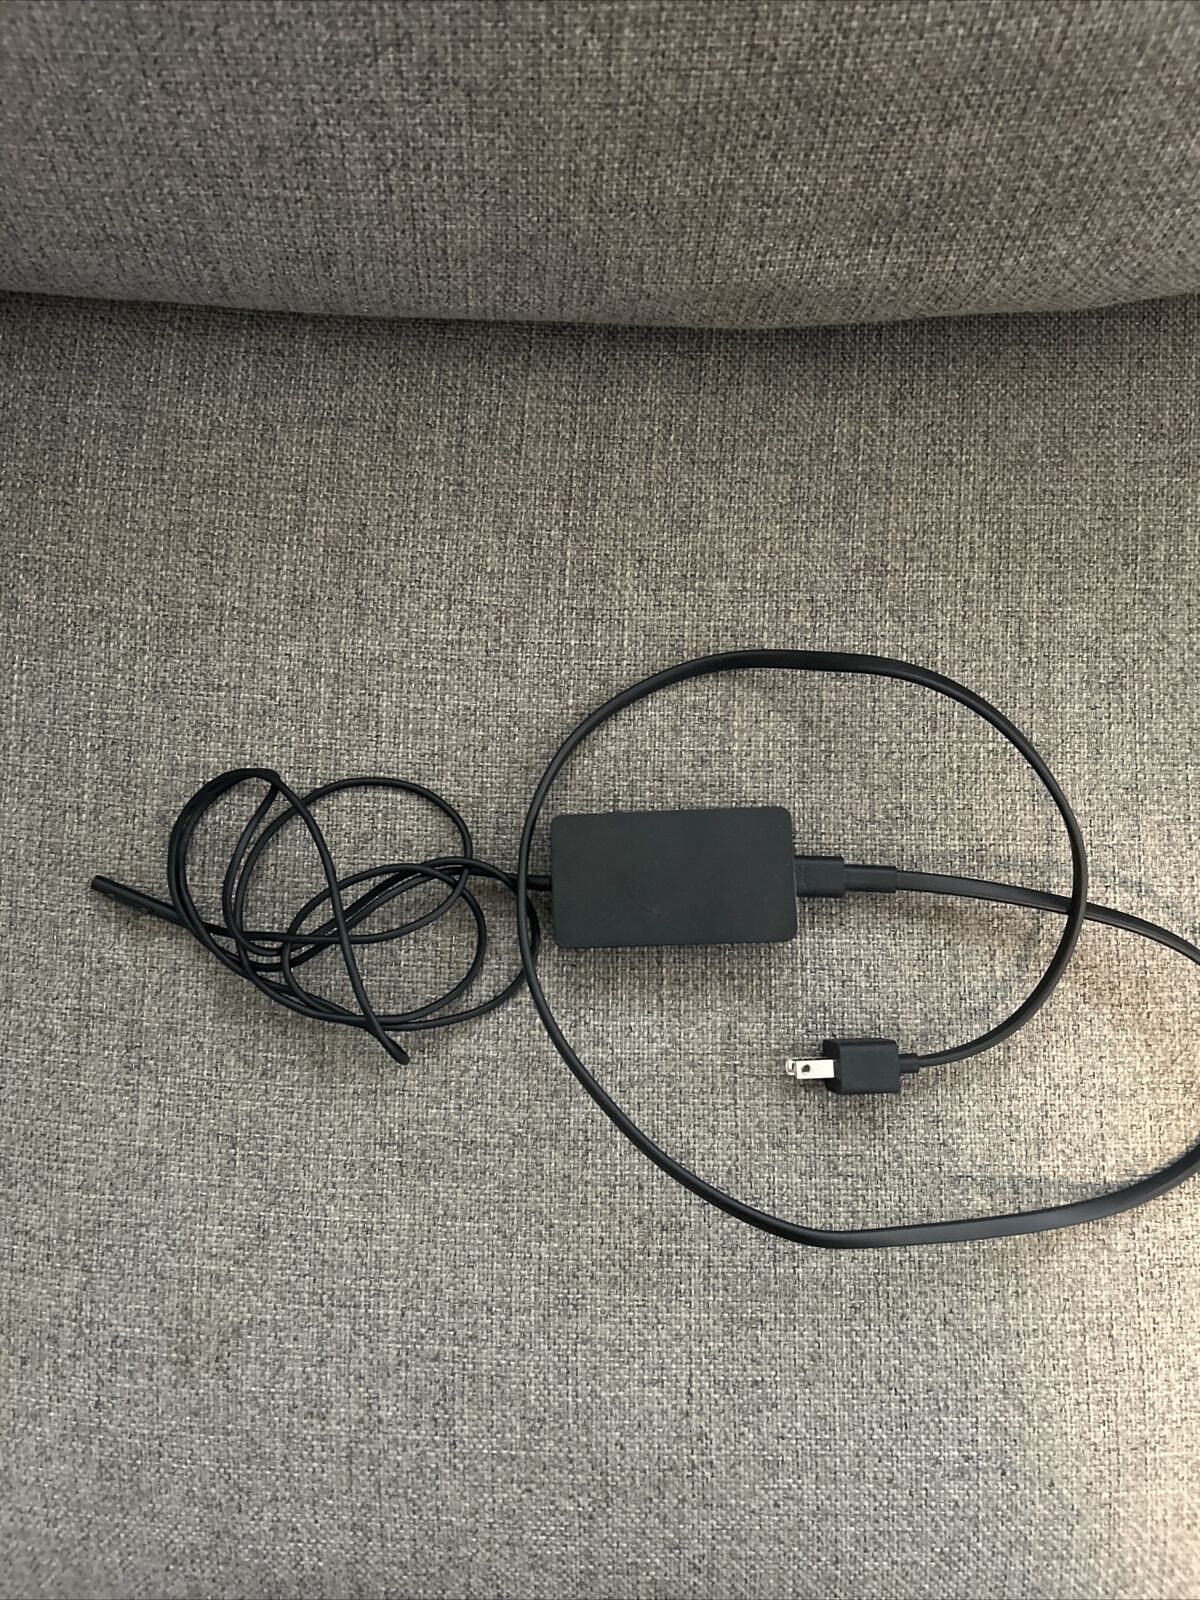 65W Power Supply Adapter for Microsoft Surface (Barely Used)